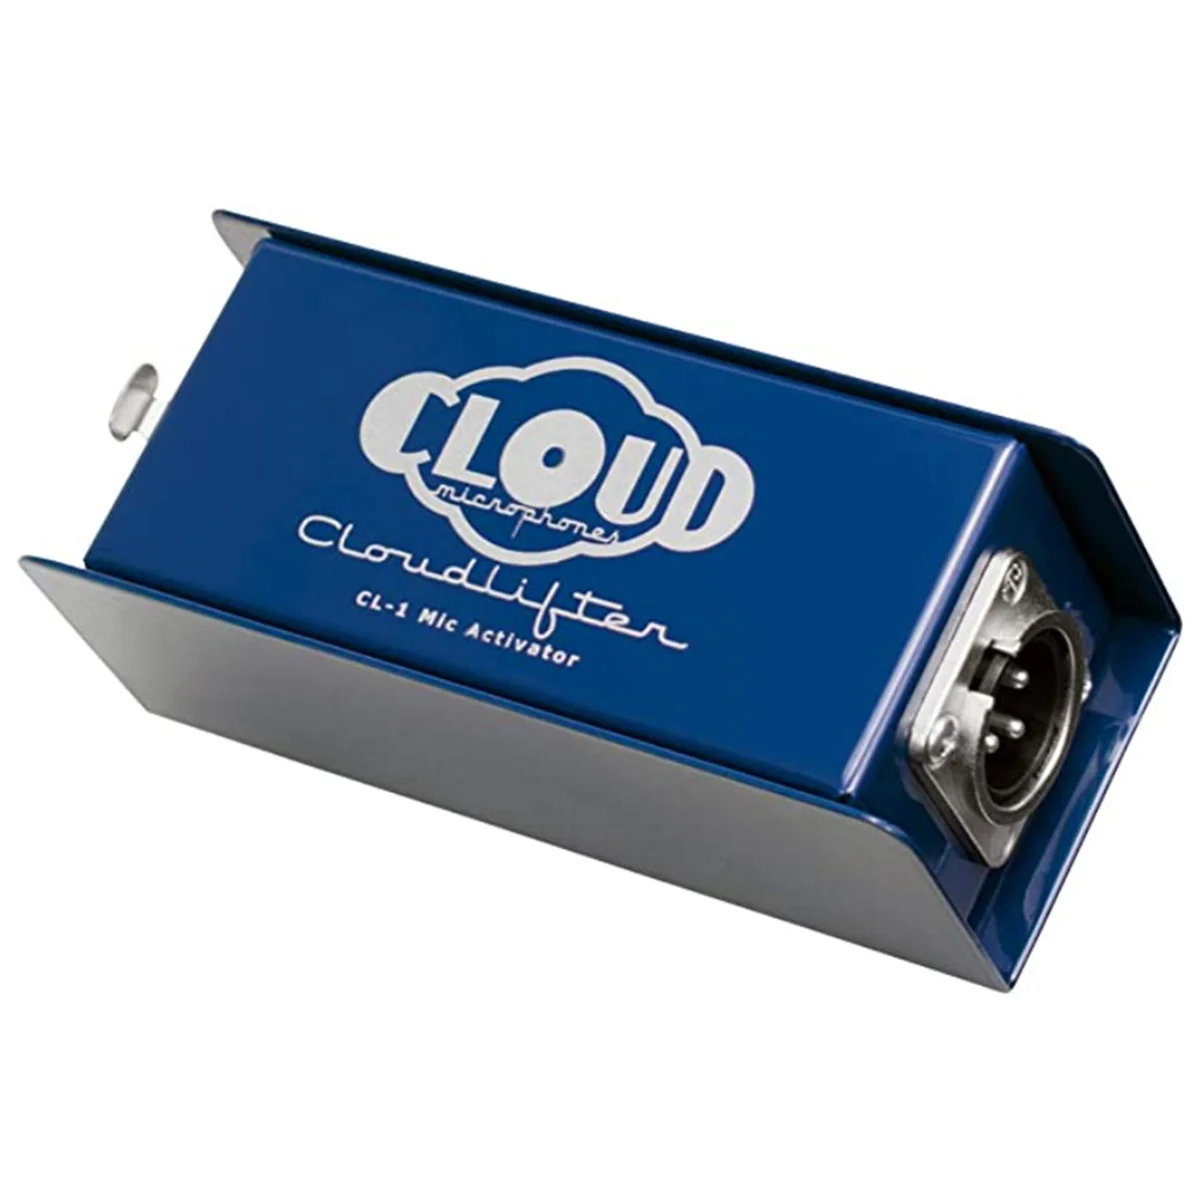 

Cloud Microphones - Cloudlifter CL-1 Microphone Activator - Ultra-Clean Microphone Preamp Gain